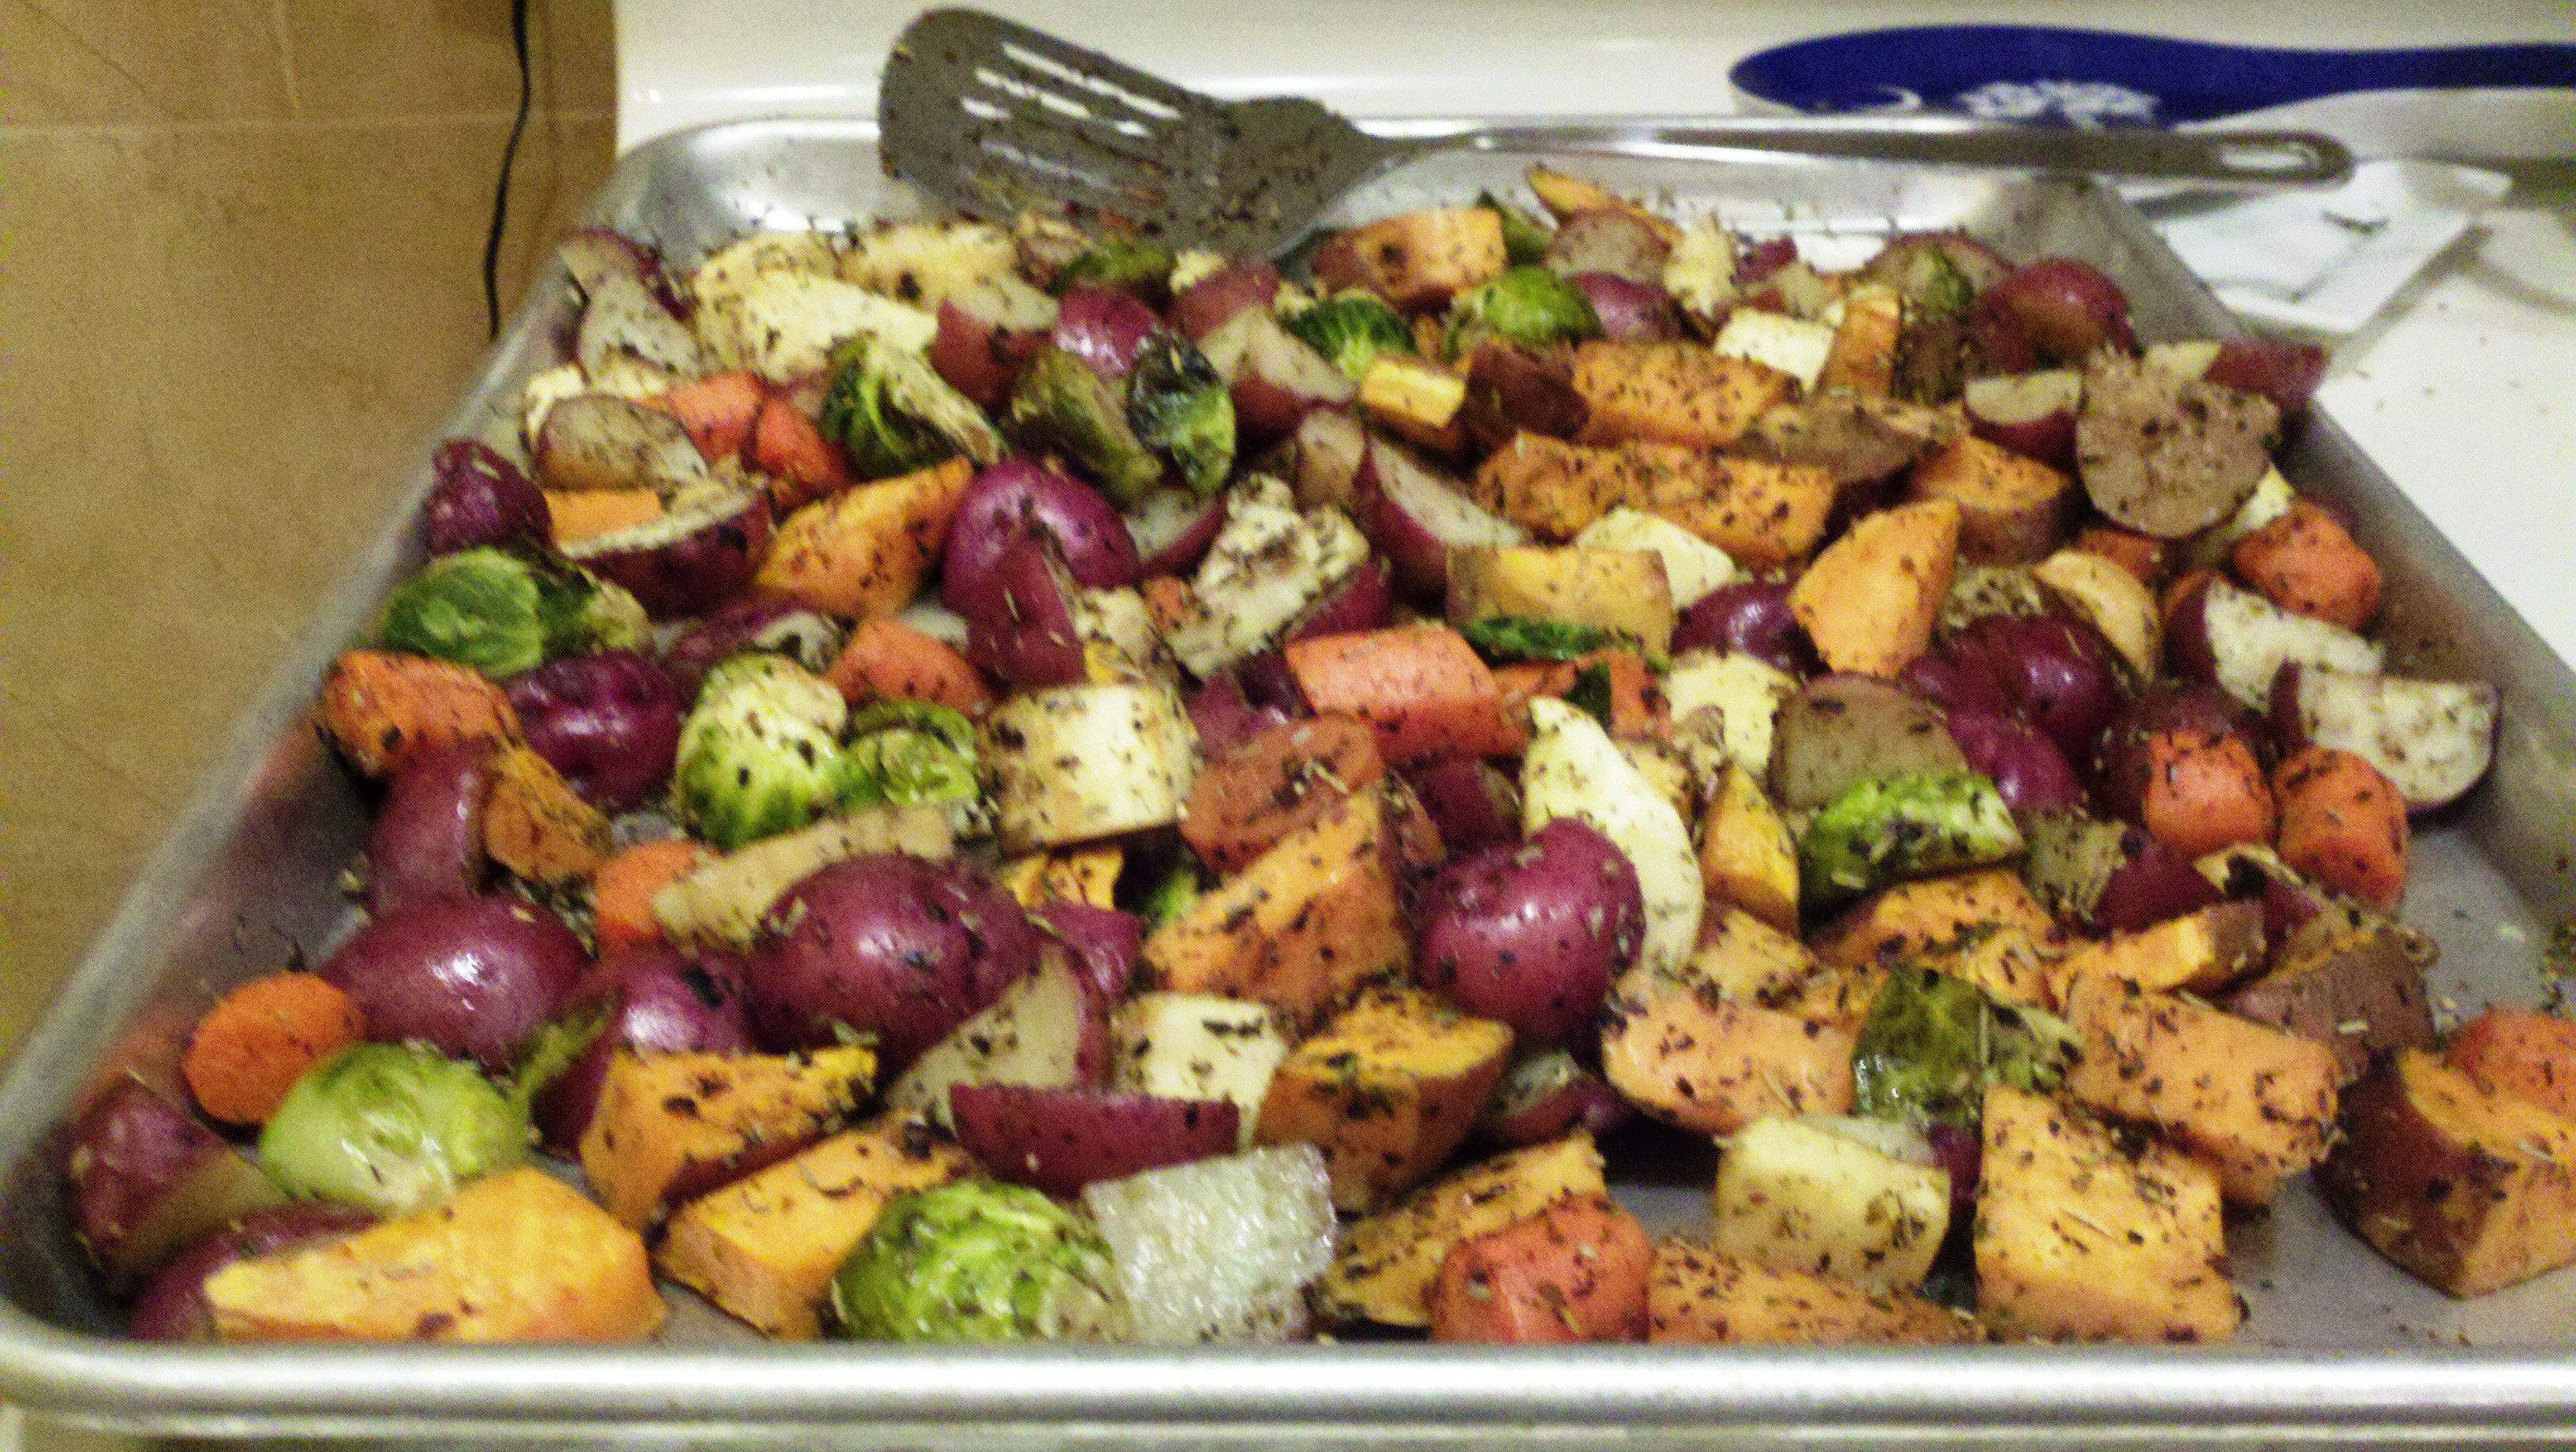 Roasted Root Vegetables Thanksgiving
 roasted ve ables thanksgiving